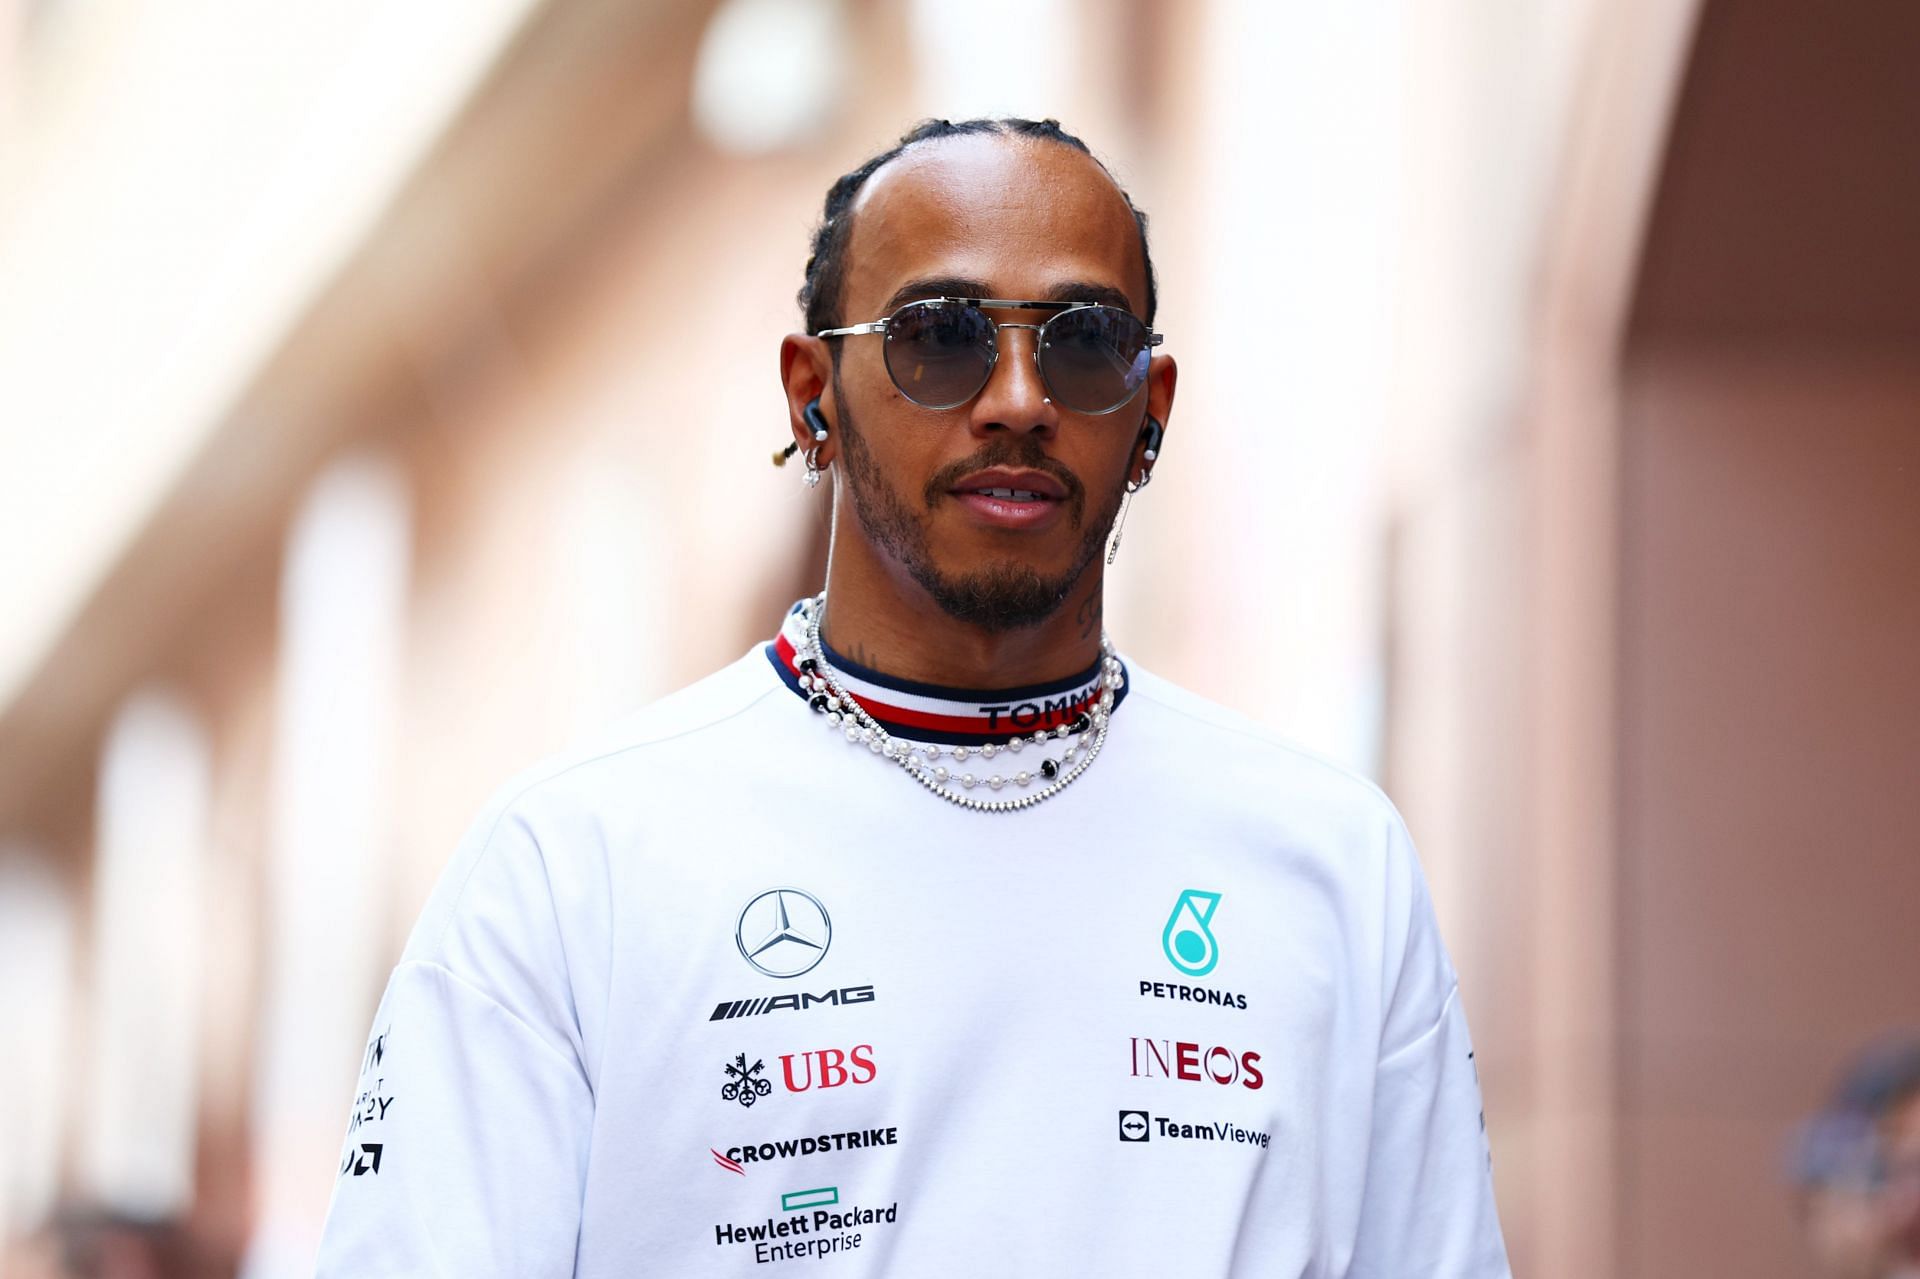 Lewis Hamilton arriving at the paddock ahead of the 2022 Monaco GP